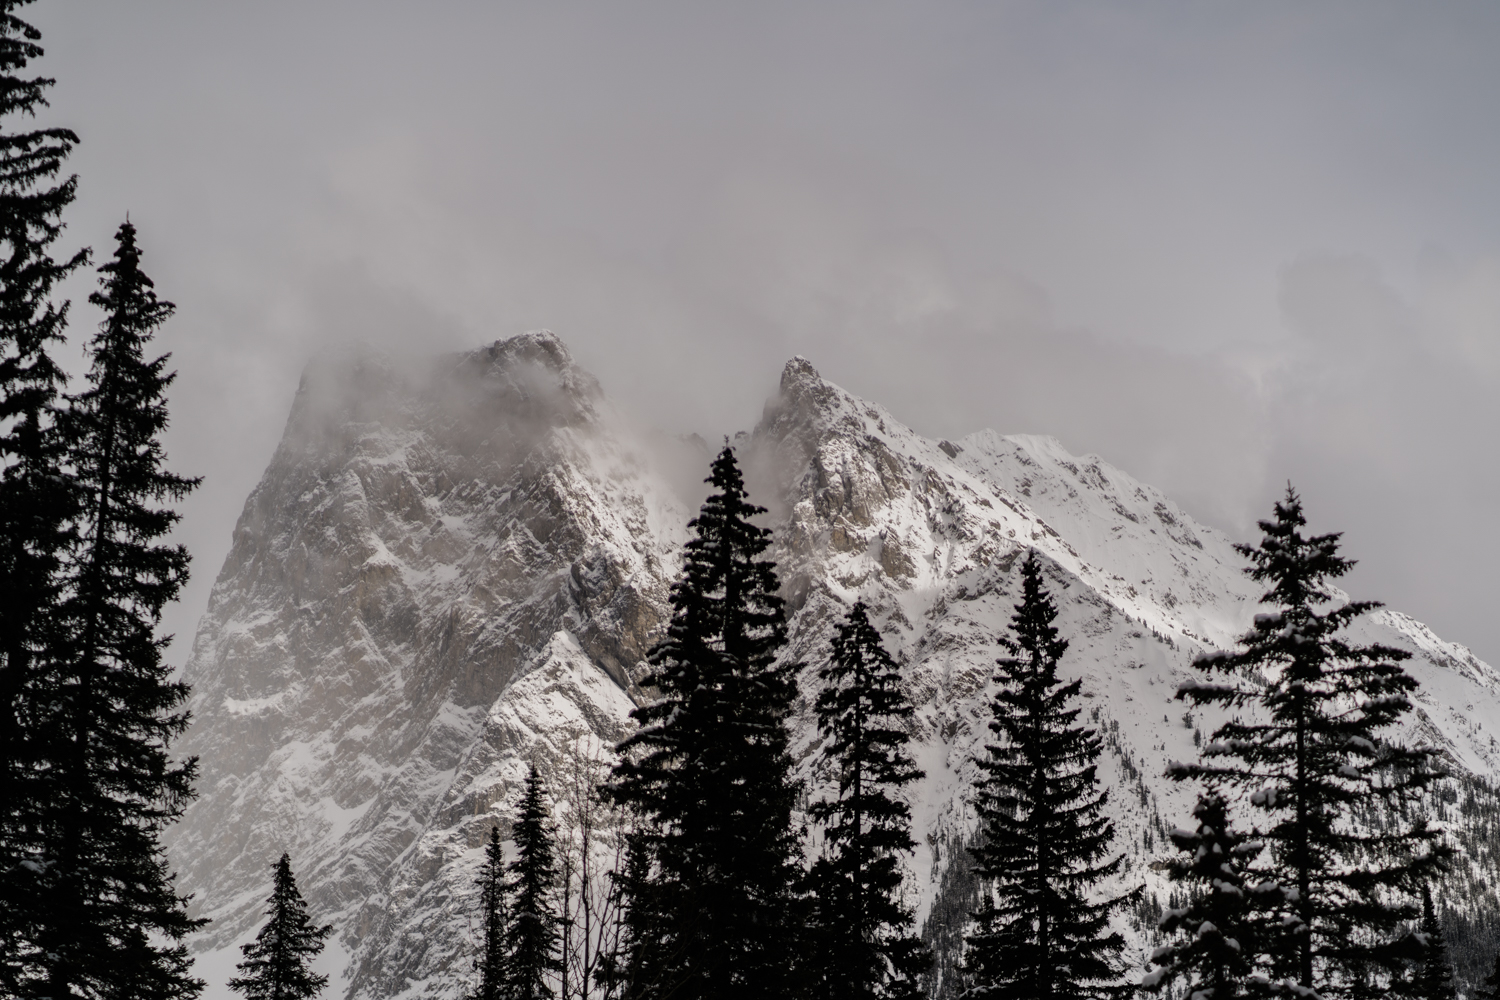 The snow dusted peaks in the clouds in Yoho National Park